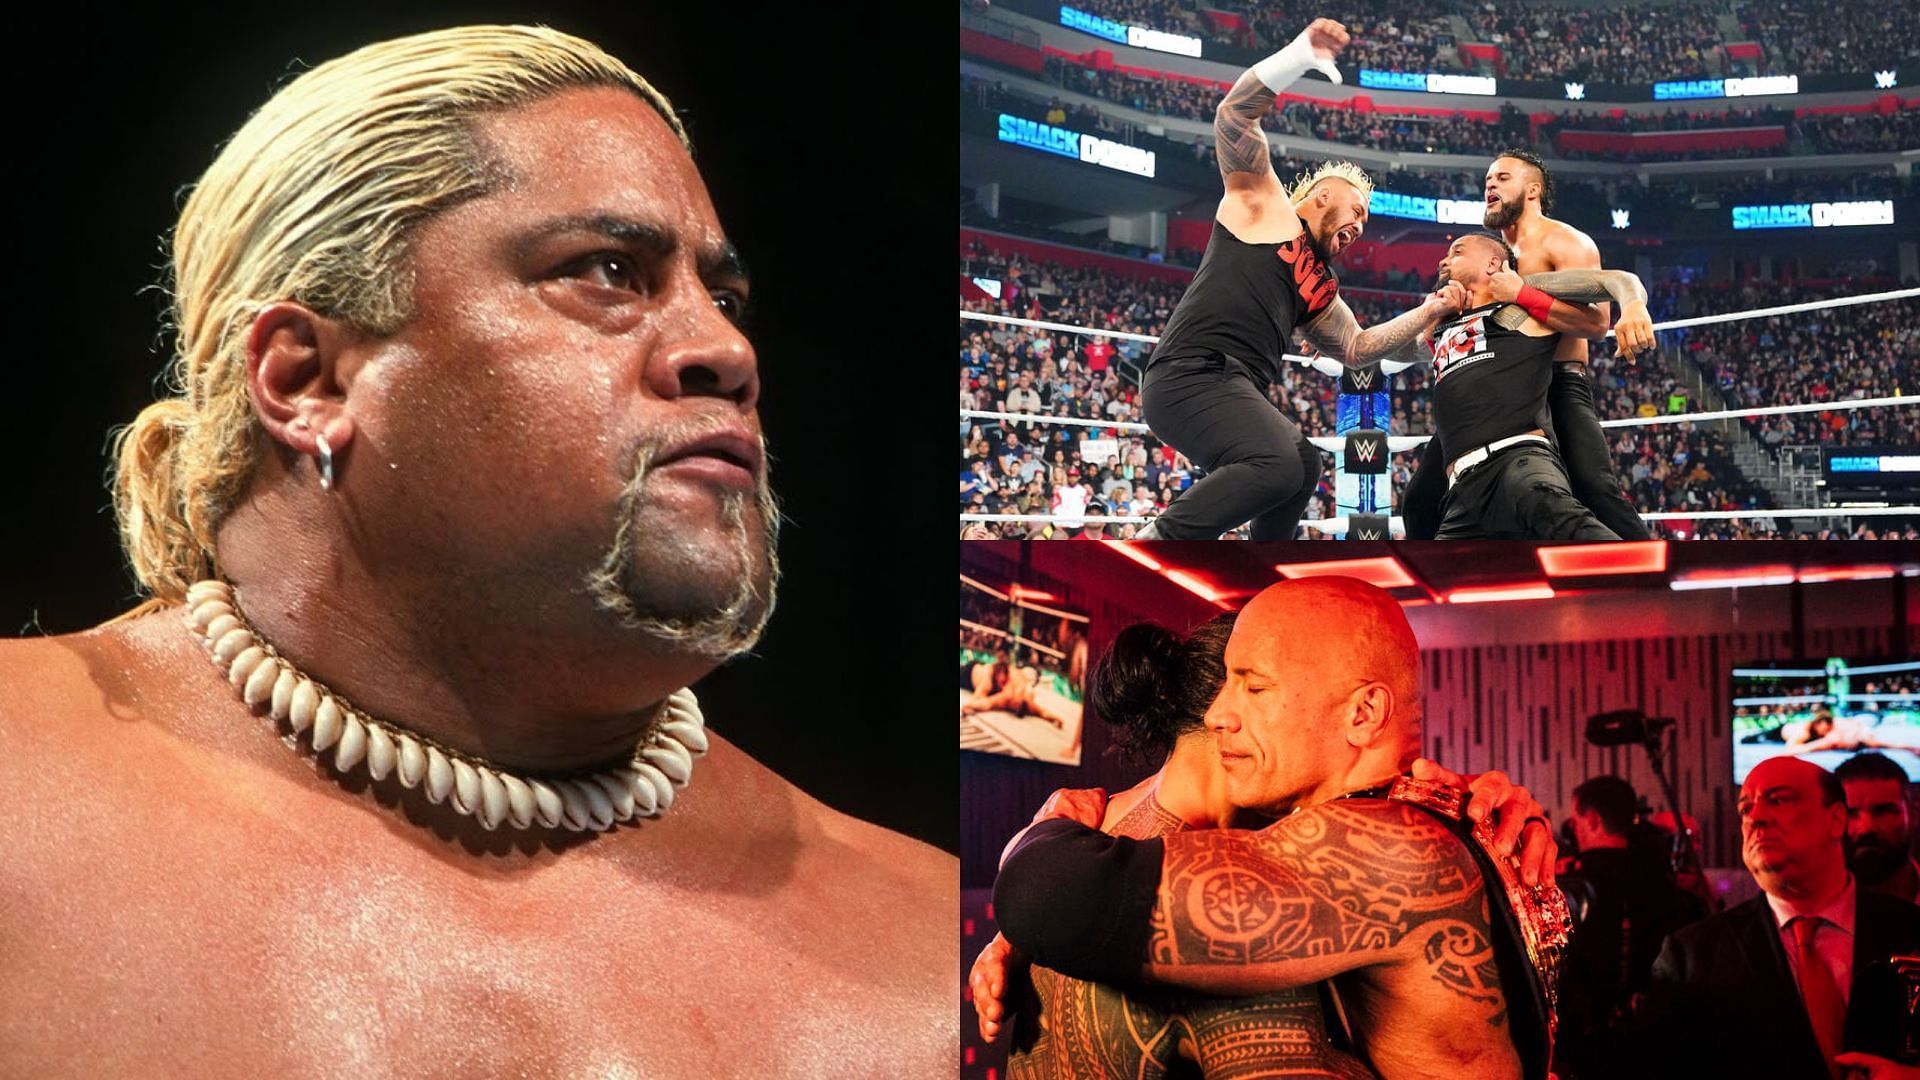 Rikishi is a member of the Anoa